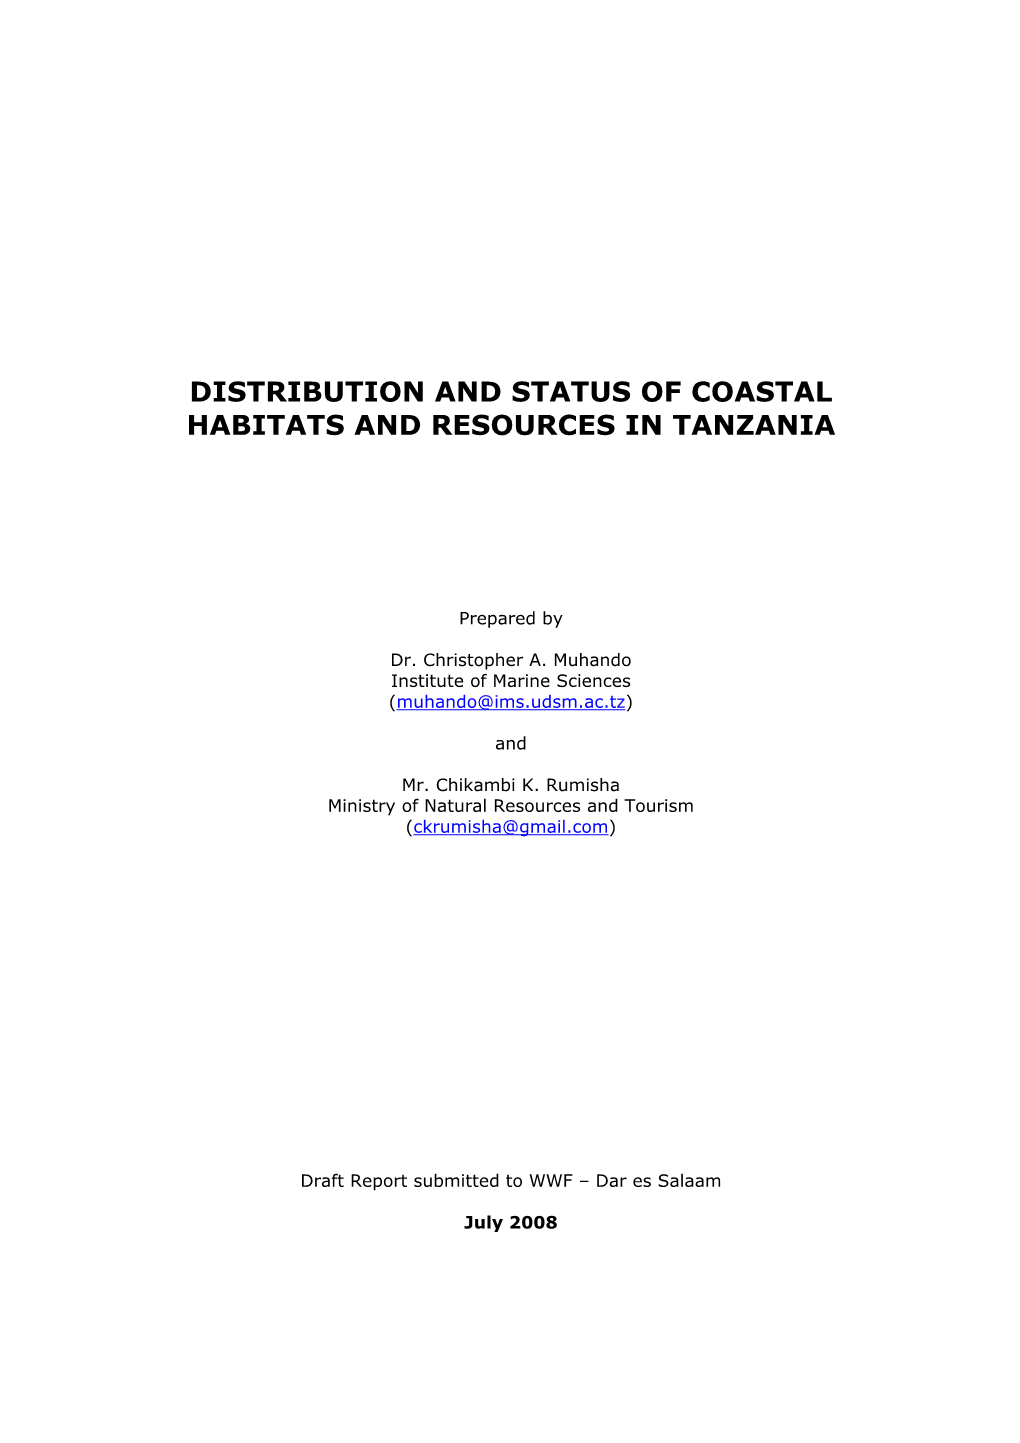 Distribution and Status of Coastal Habitats and Resources in Tanzania